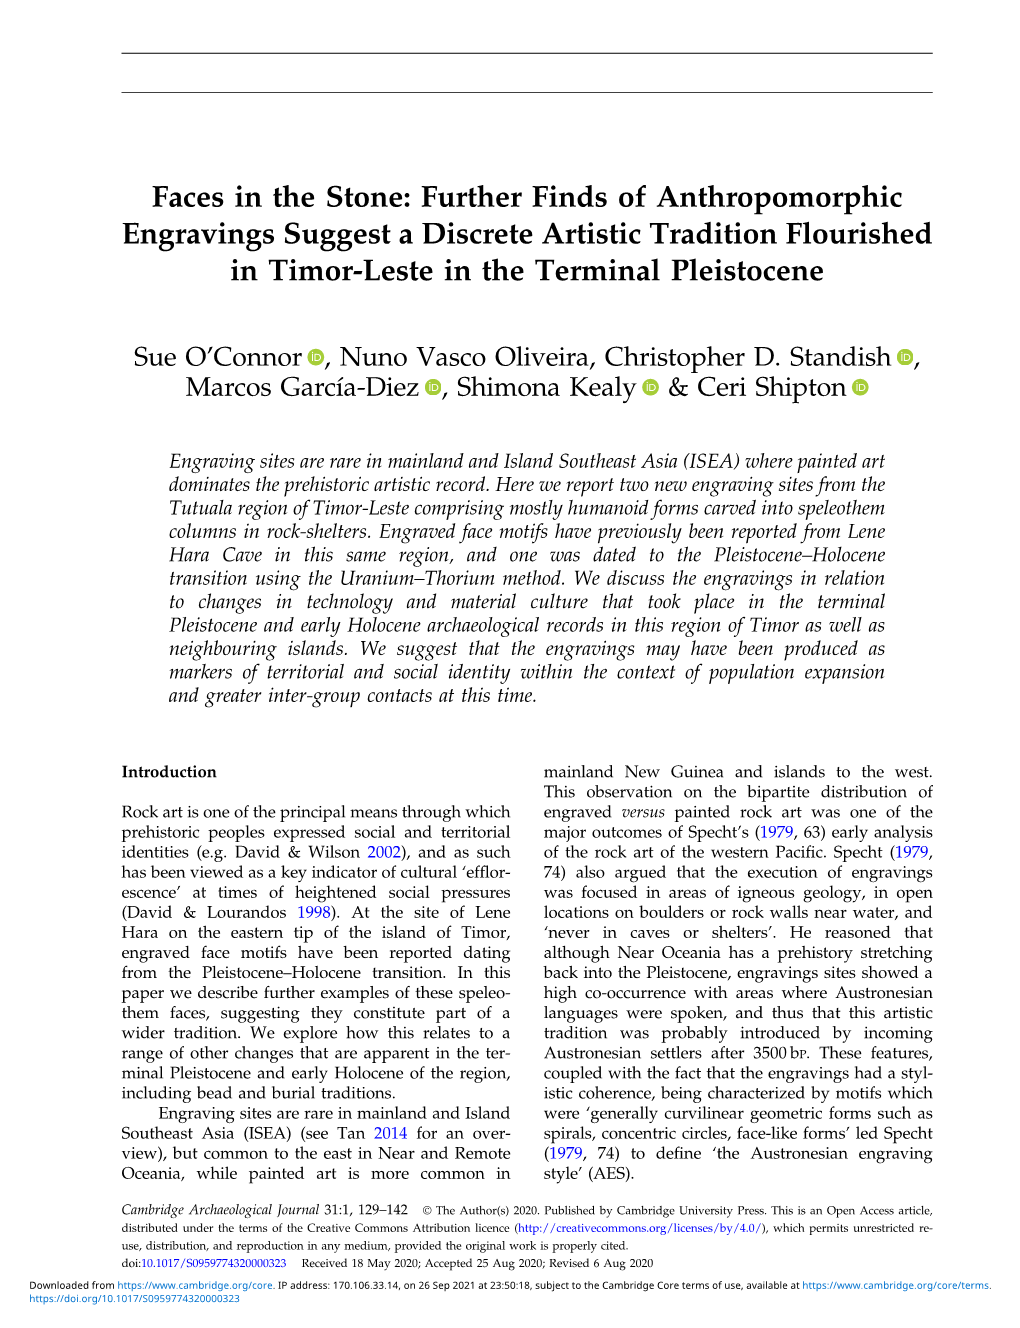 Faces in the Stone: Further Finds of Anthropomorphic Engravings Suggest a Discrete Artistic Tradition Flourished in Timor-Leste in the Terminal Pleistocene